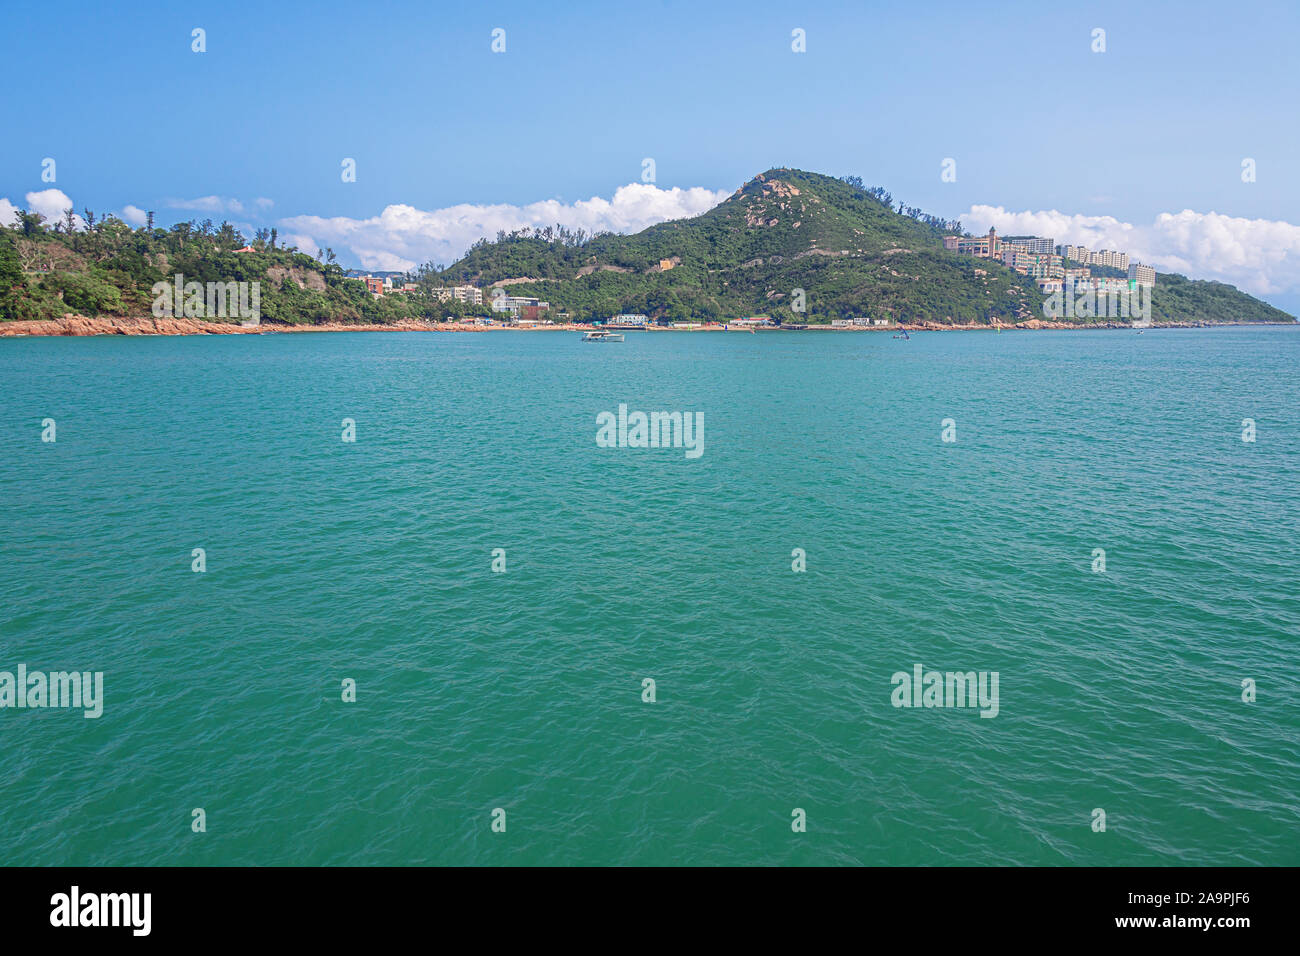 View of Repulsive Bay and its dominating hills in Hong Kong Stock Photo